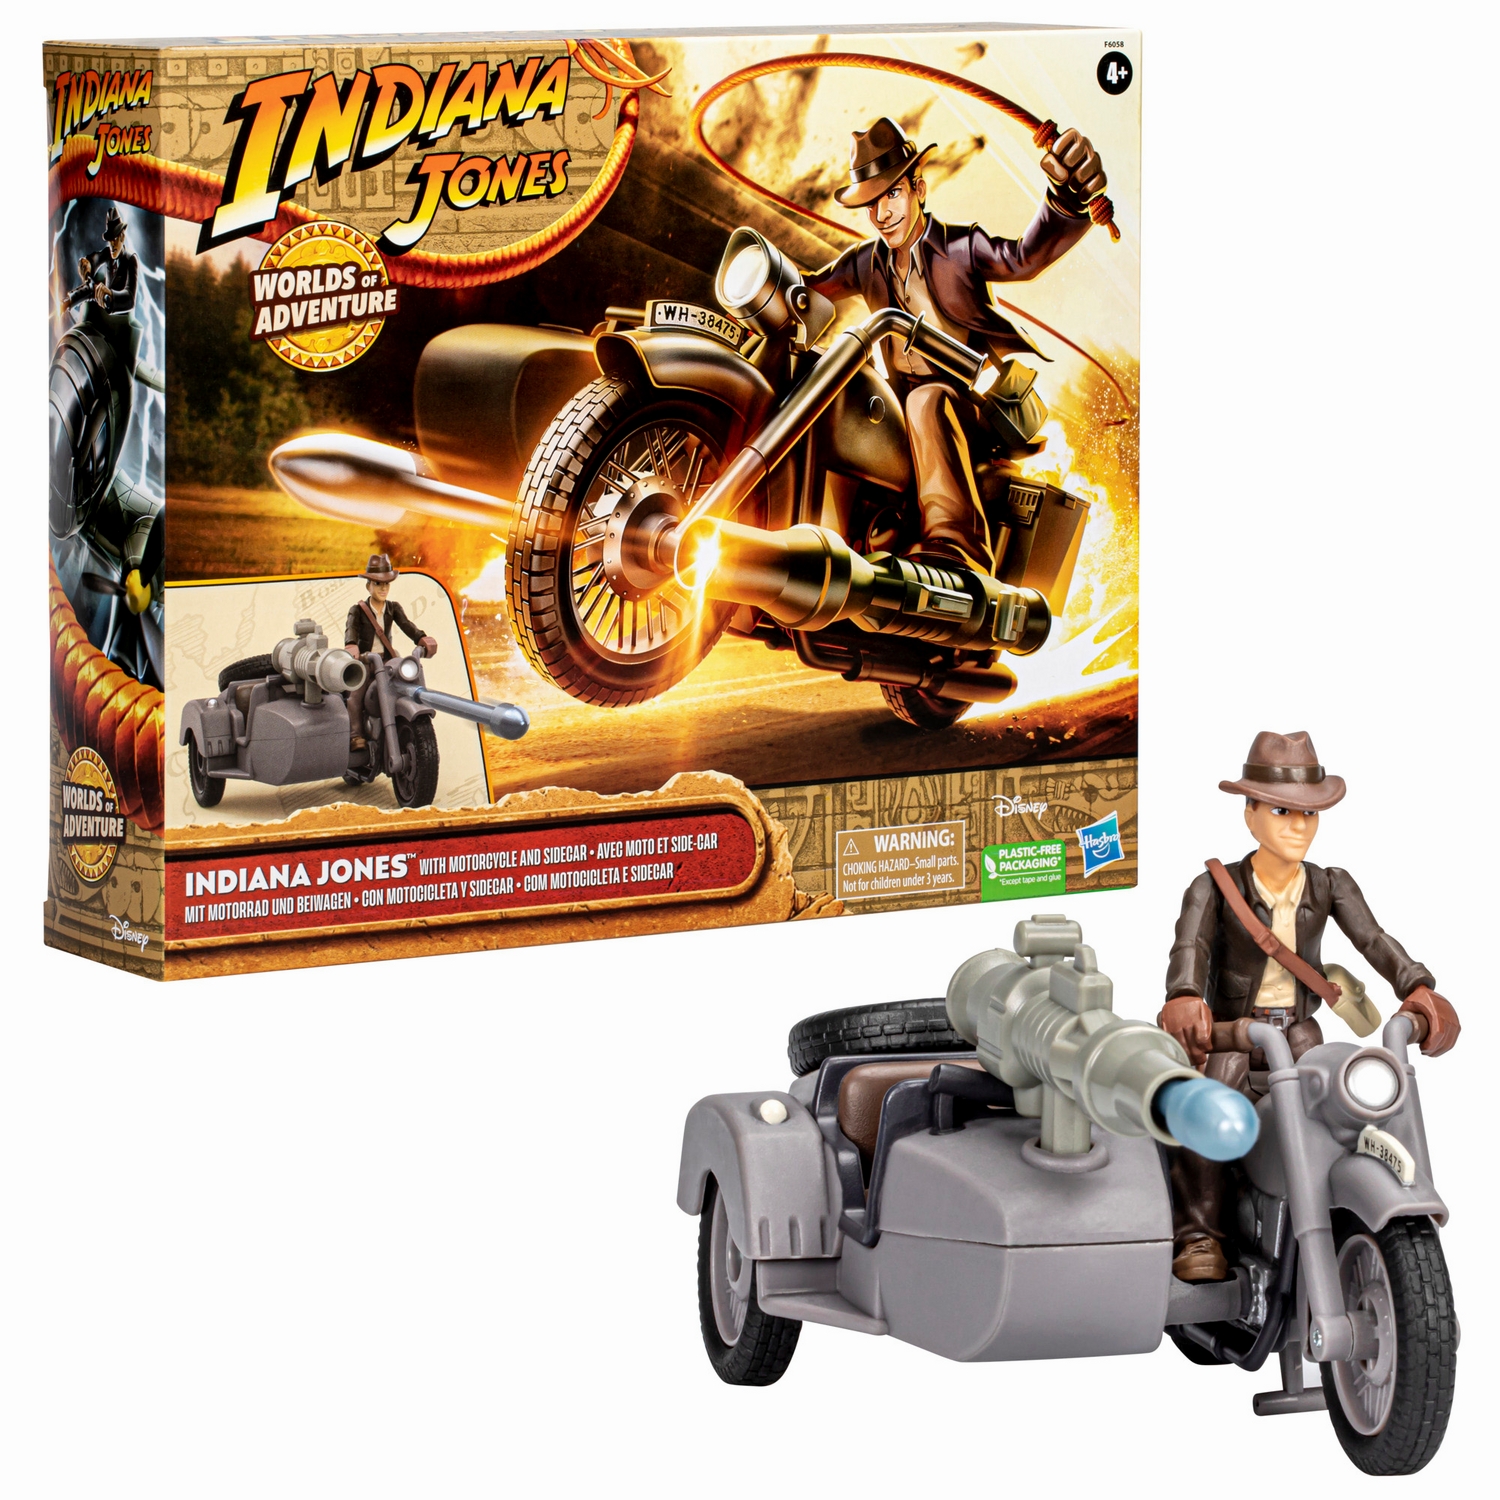 INDIANA JONES WORLDS OF ADVENTURE INDIANA JONES WITH MOTORCYCLE AND SIDECAR - Package 1.jpg